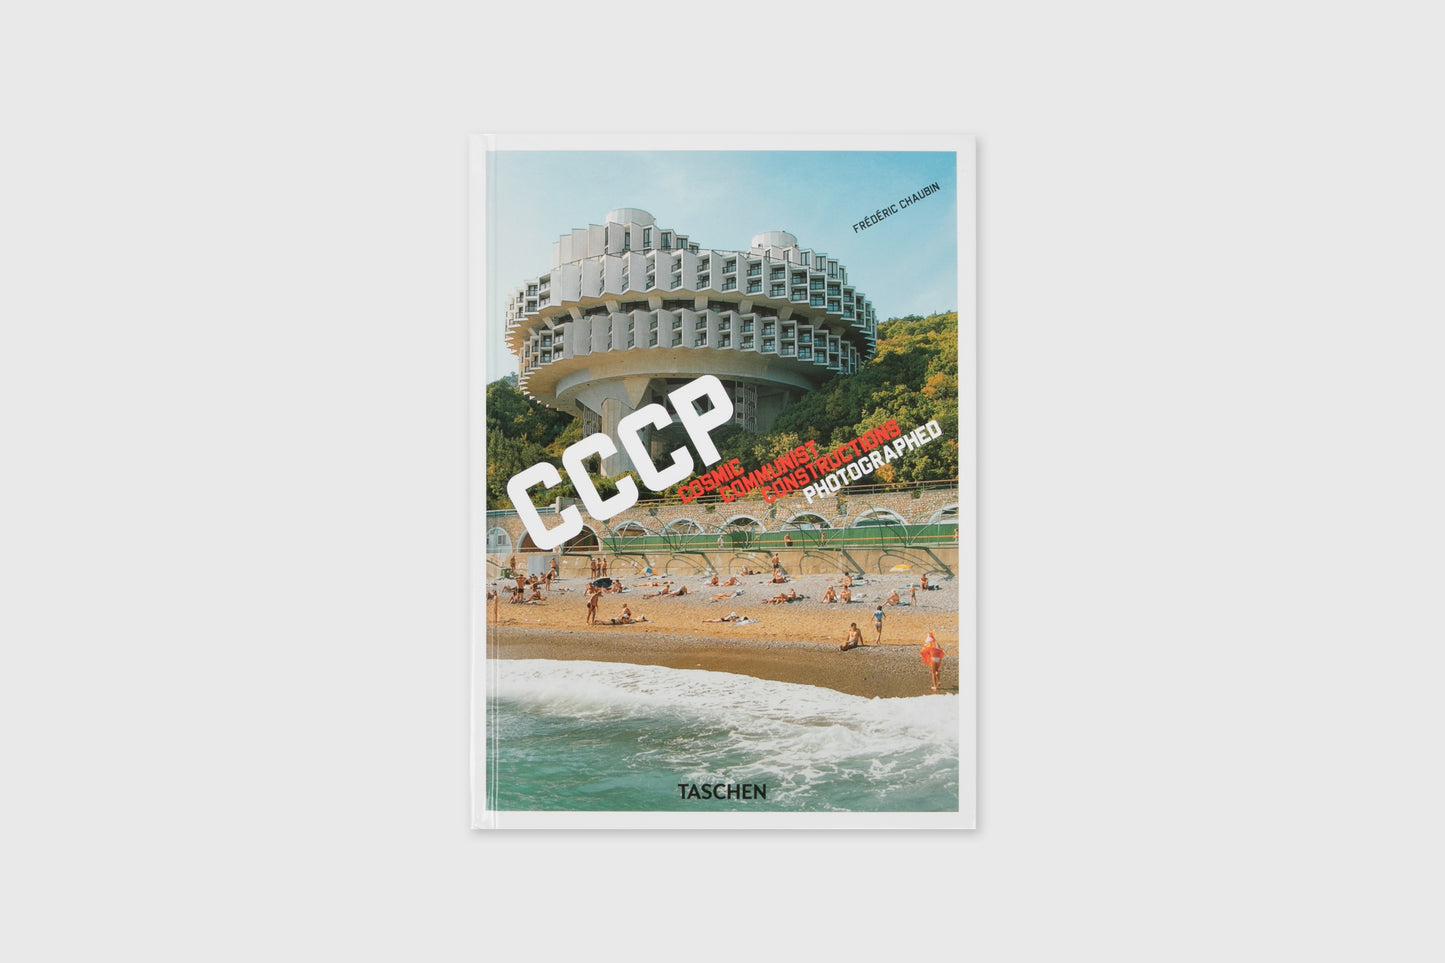 CCCP. Cosmic Communist Constructions Photographed (40th Ed.)